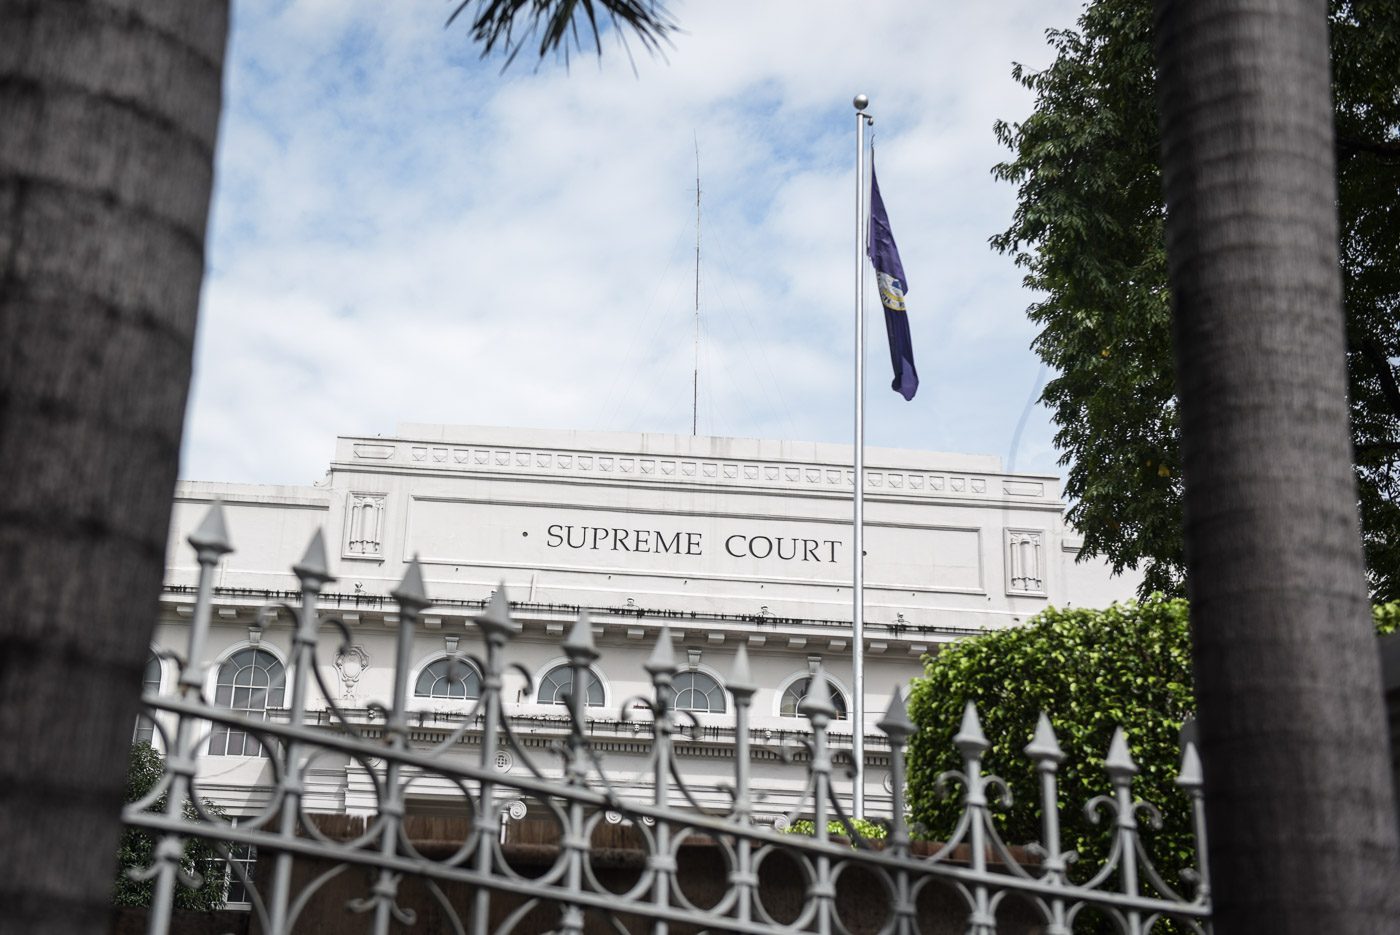 Philippine courts reduce operations, night courts closed